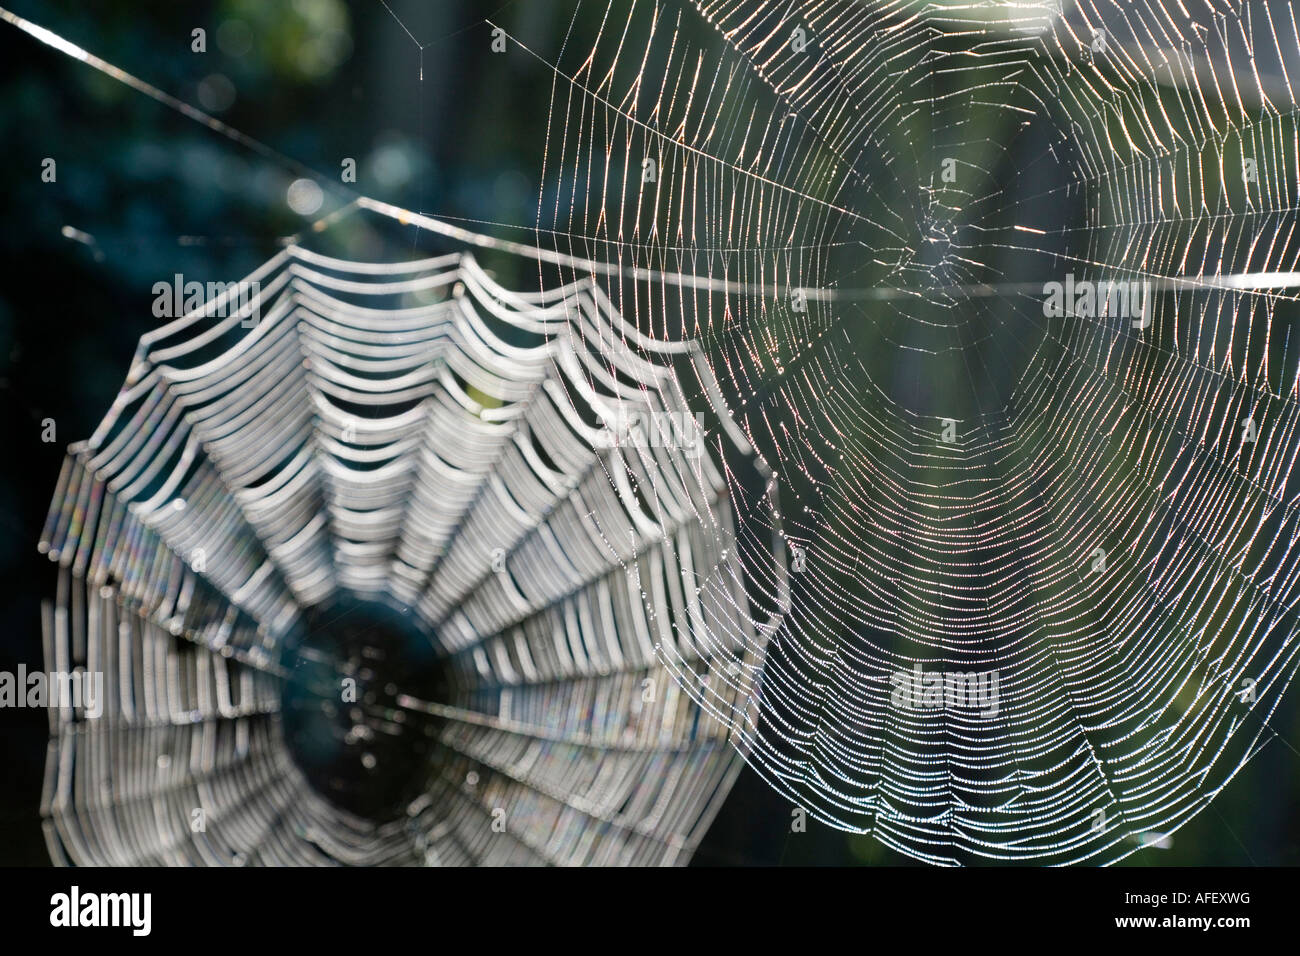 Detail of two cobwebs against a dark background Stock Photo